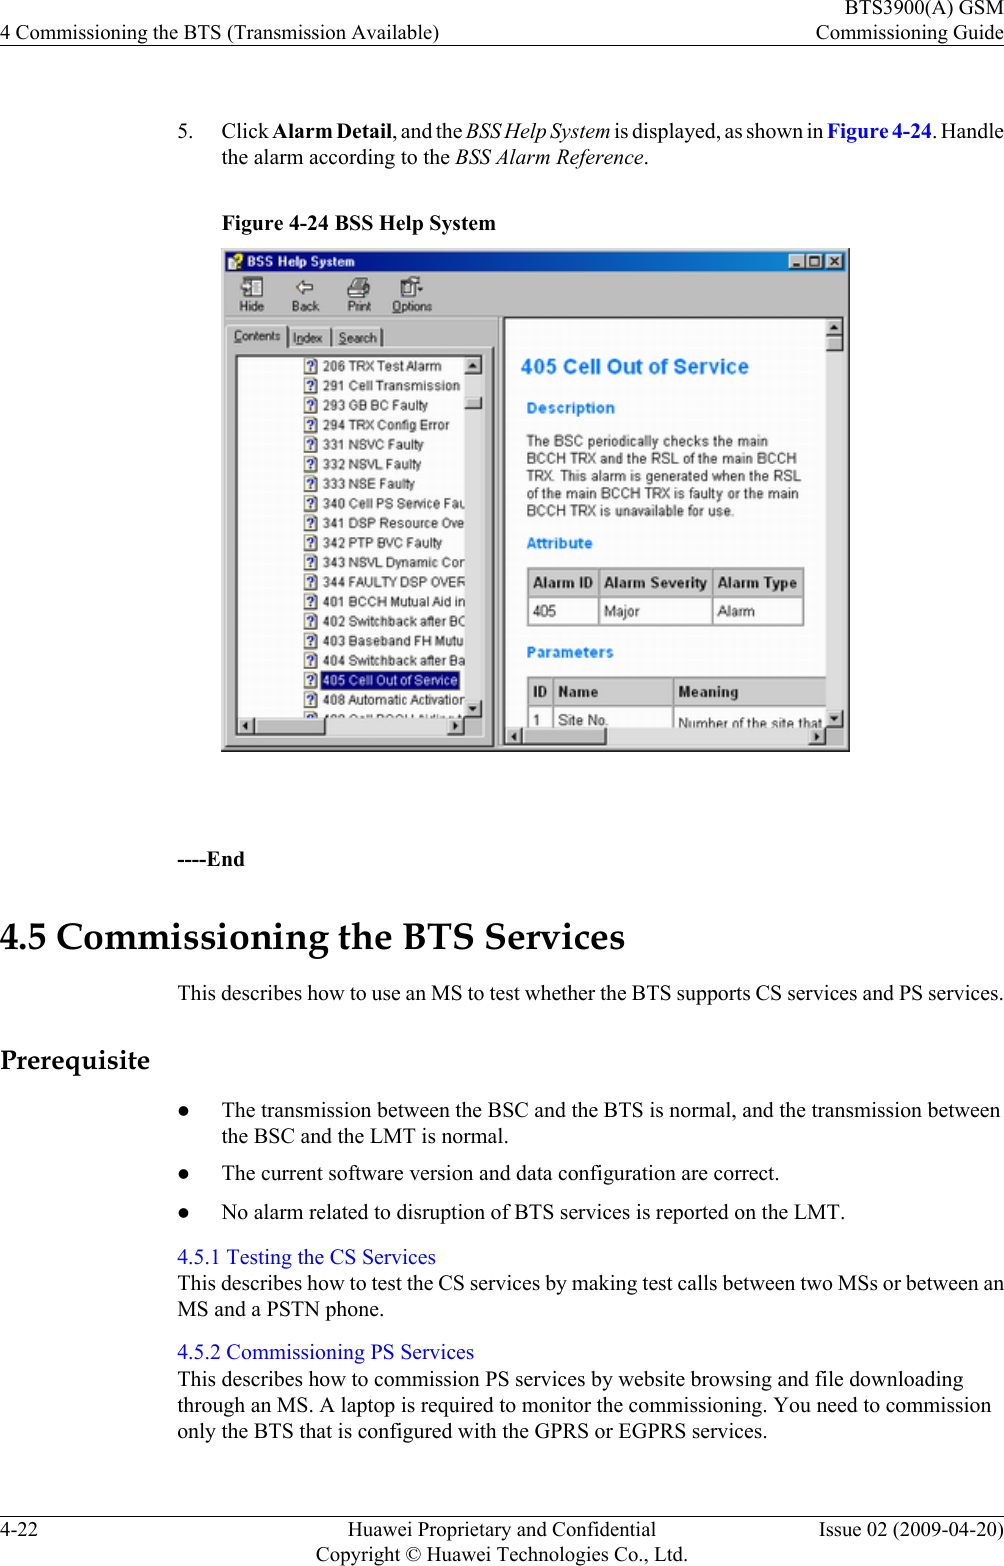  5. Click Alarm Detail, and the BSS Help System is displayed, as shown in Figure 4-24. Handlethe alarm according to the BSS Alarm Reference.Figure 4-24 BSS Help System ----End4.5 Commissioning the BTS ServicesThis describes how to use an MS to test whether the BTS supports CS services and PS services.PrerequisitelThe transmission between the BSC and the BTS is normal, and the transmission betweenthe BSC and the LMT is normal.lThe current software version and data configuration are correct.lNo alarm related to disruption of BTS services is reported on the LMT.4.5.1 Testing the CS ServicesThis describes how to test the CS services by making test calls between two MSs or between anMS and a PSTN phone.4.5.2 Commissioning PS ServicesThis describes how to commission PS services by website browsing and file downloadingthrough an MS. A laptop is required to monitor the commissioning. You need to commissiononly the BTS that is configured with the GPRS or EGPRS services.4 Commissioning the BTS (Transmission Available)BTS3900(A) GSMCommissioning Guide4-22 Huawei Proprietary and ConfidentialCopyright © Huawei Technologies Co., Ltd.Issue 02 (2009-04-20)